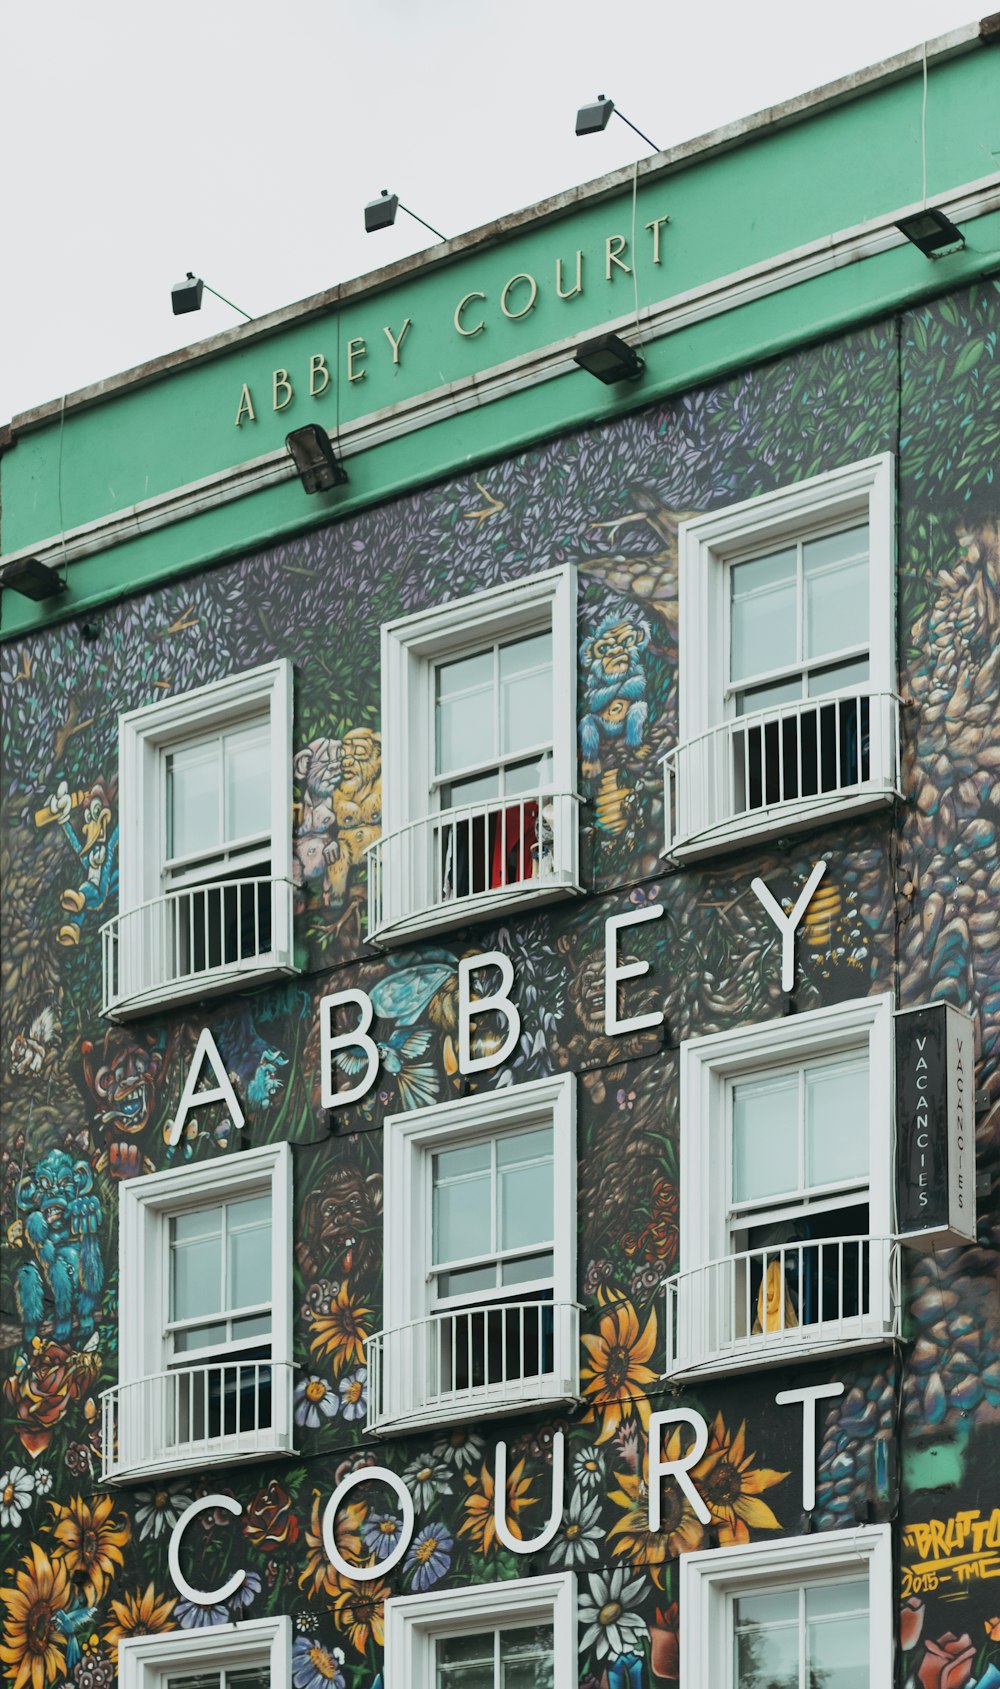 Abbey Court building during daytime